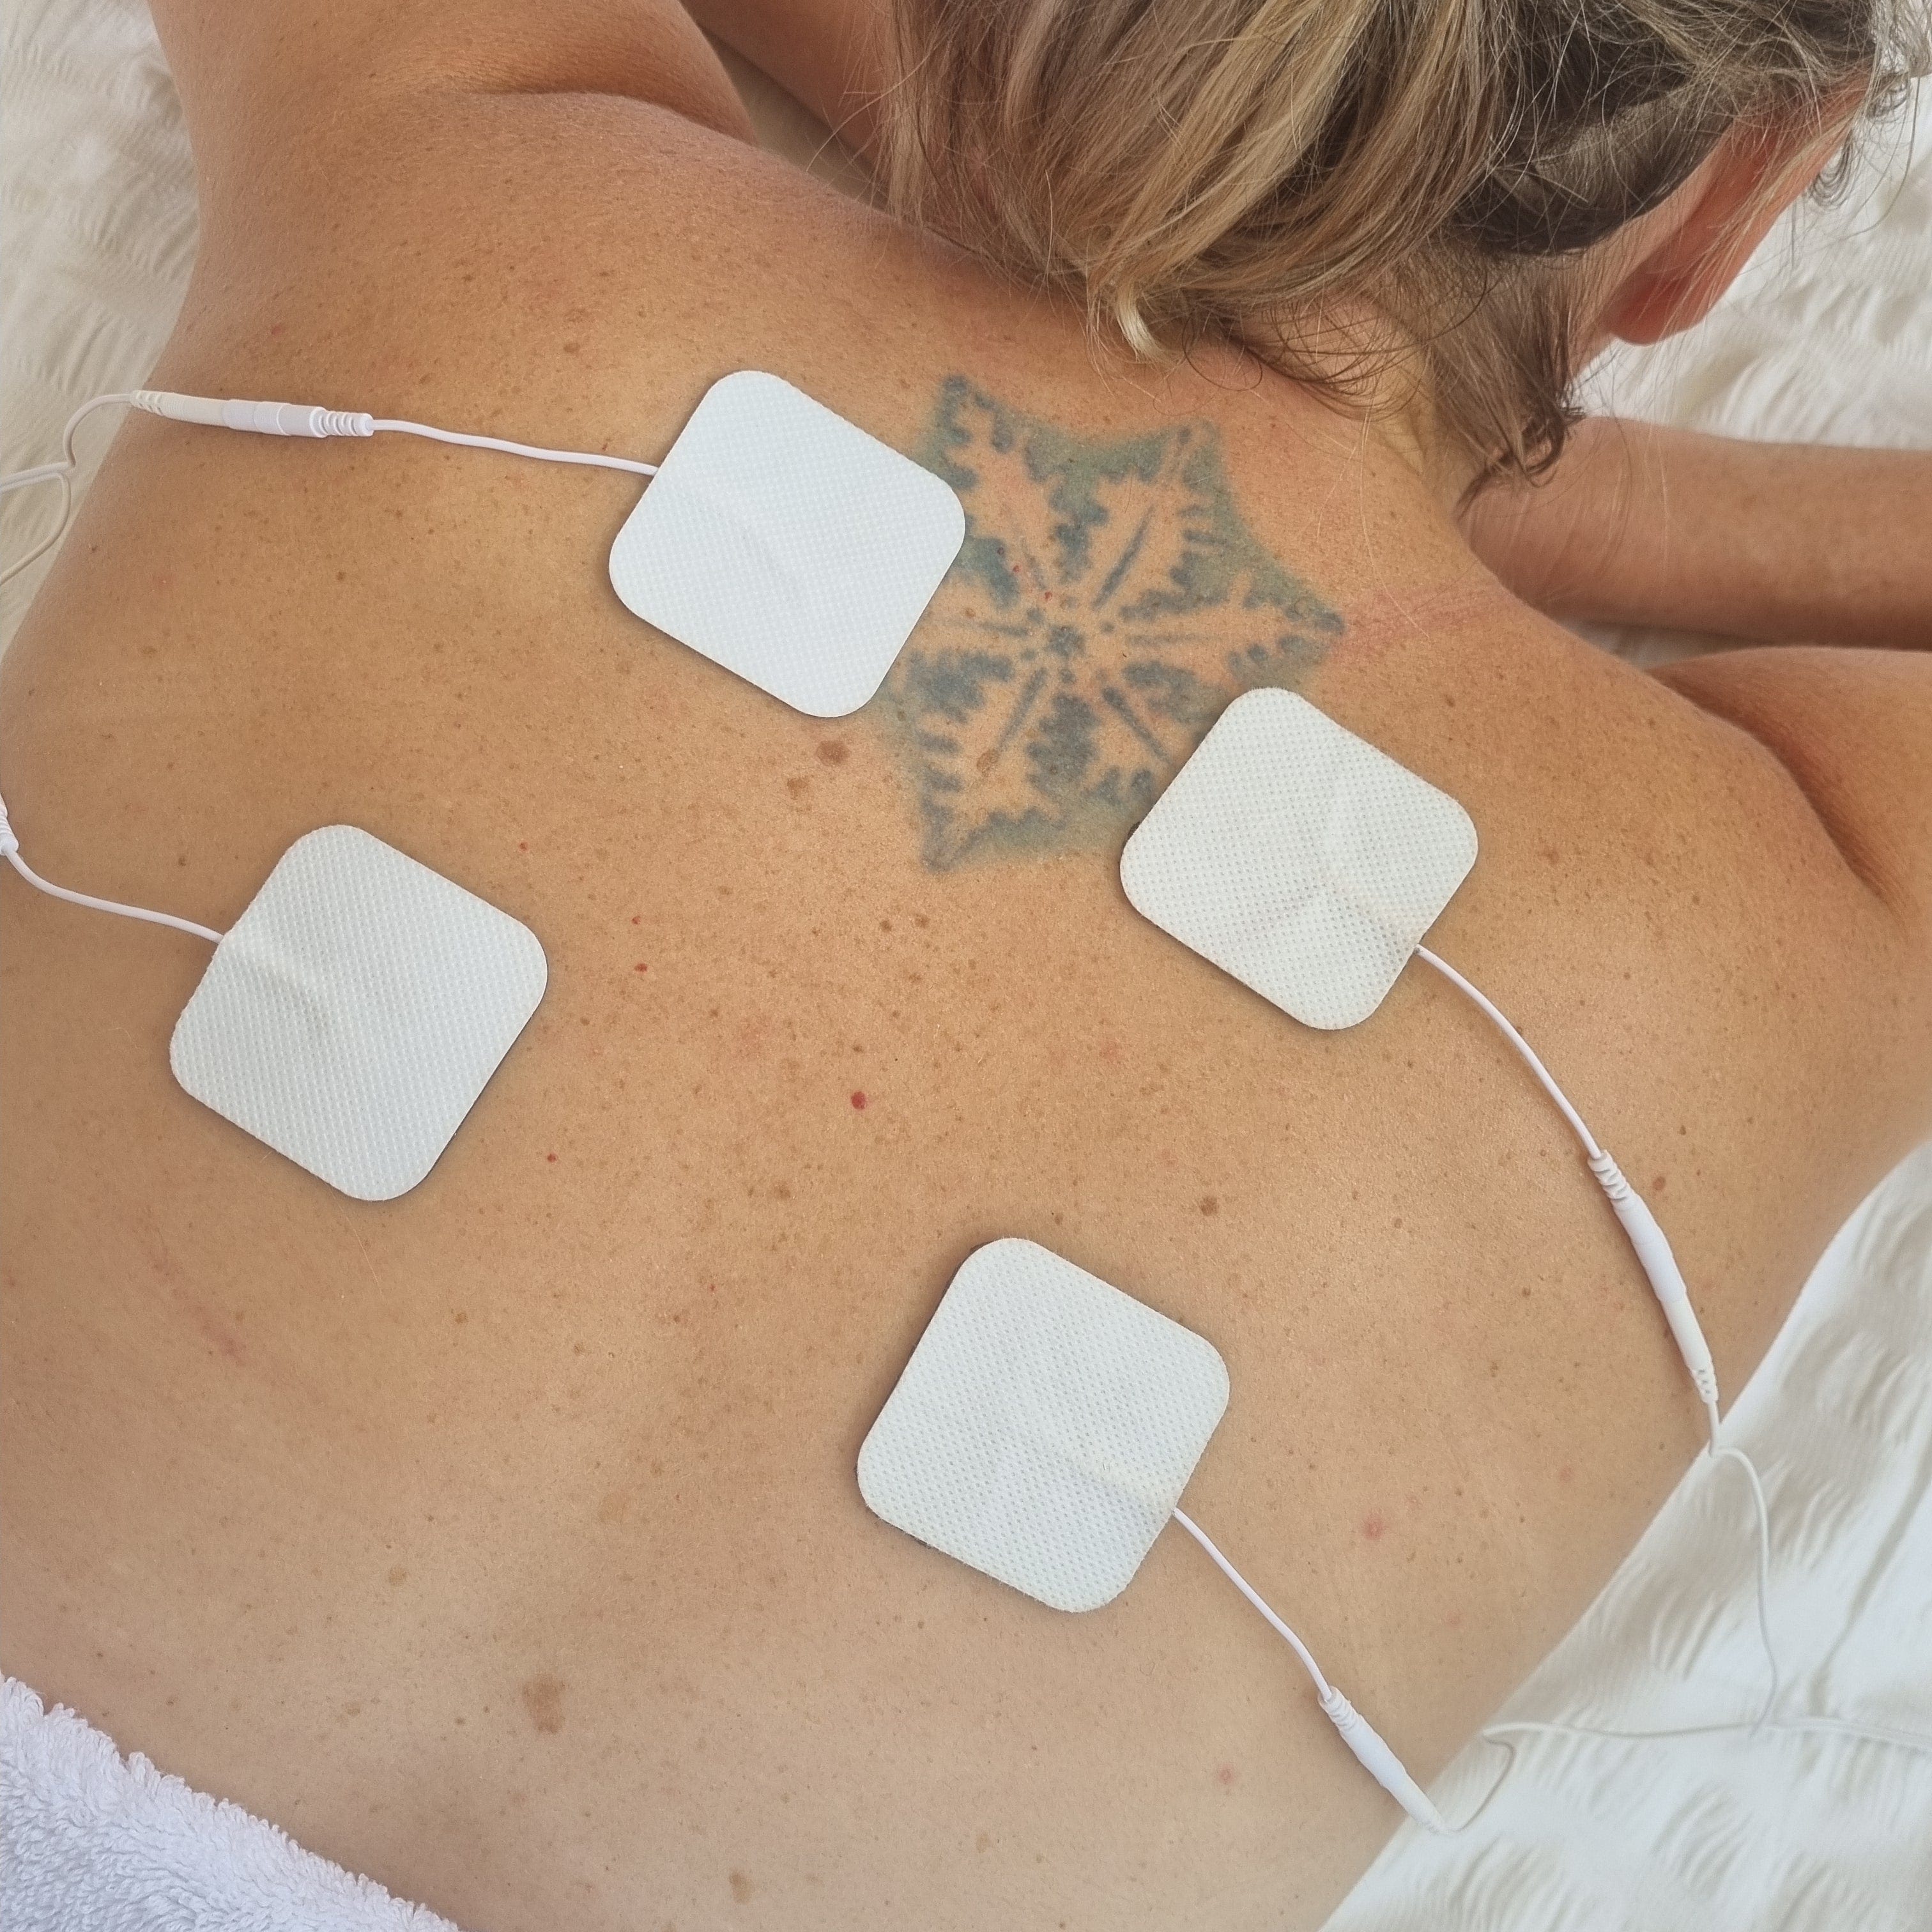 Naked back of a lady who has 4 electrode pads attached to her upper back. She is lying on a white blanket, she is blonde and fair skinned. She has a blue tattoo of a snowfake. All electrode pads are white and have white cords. 